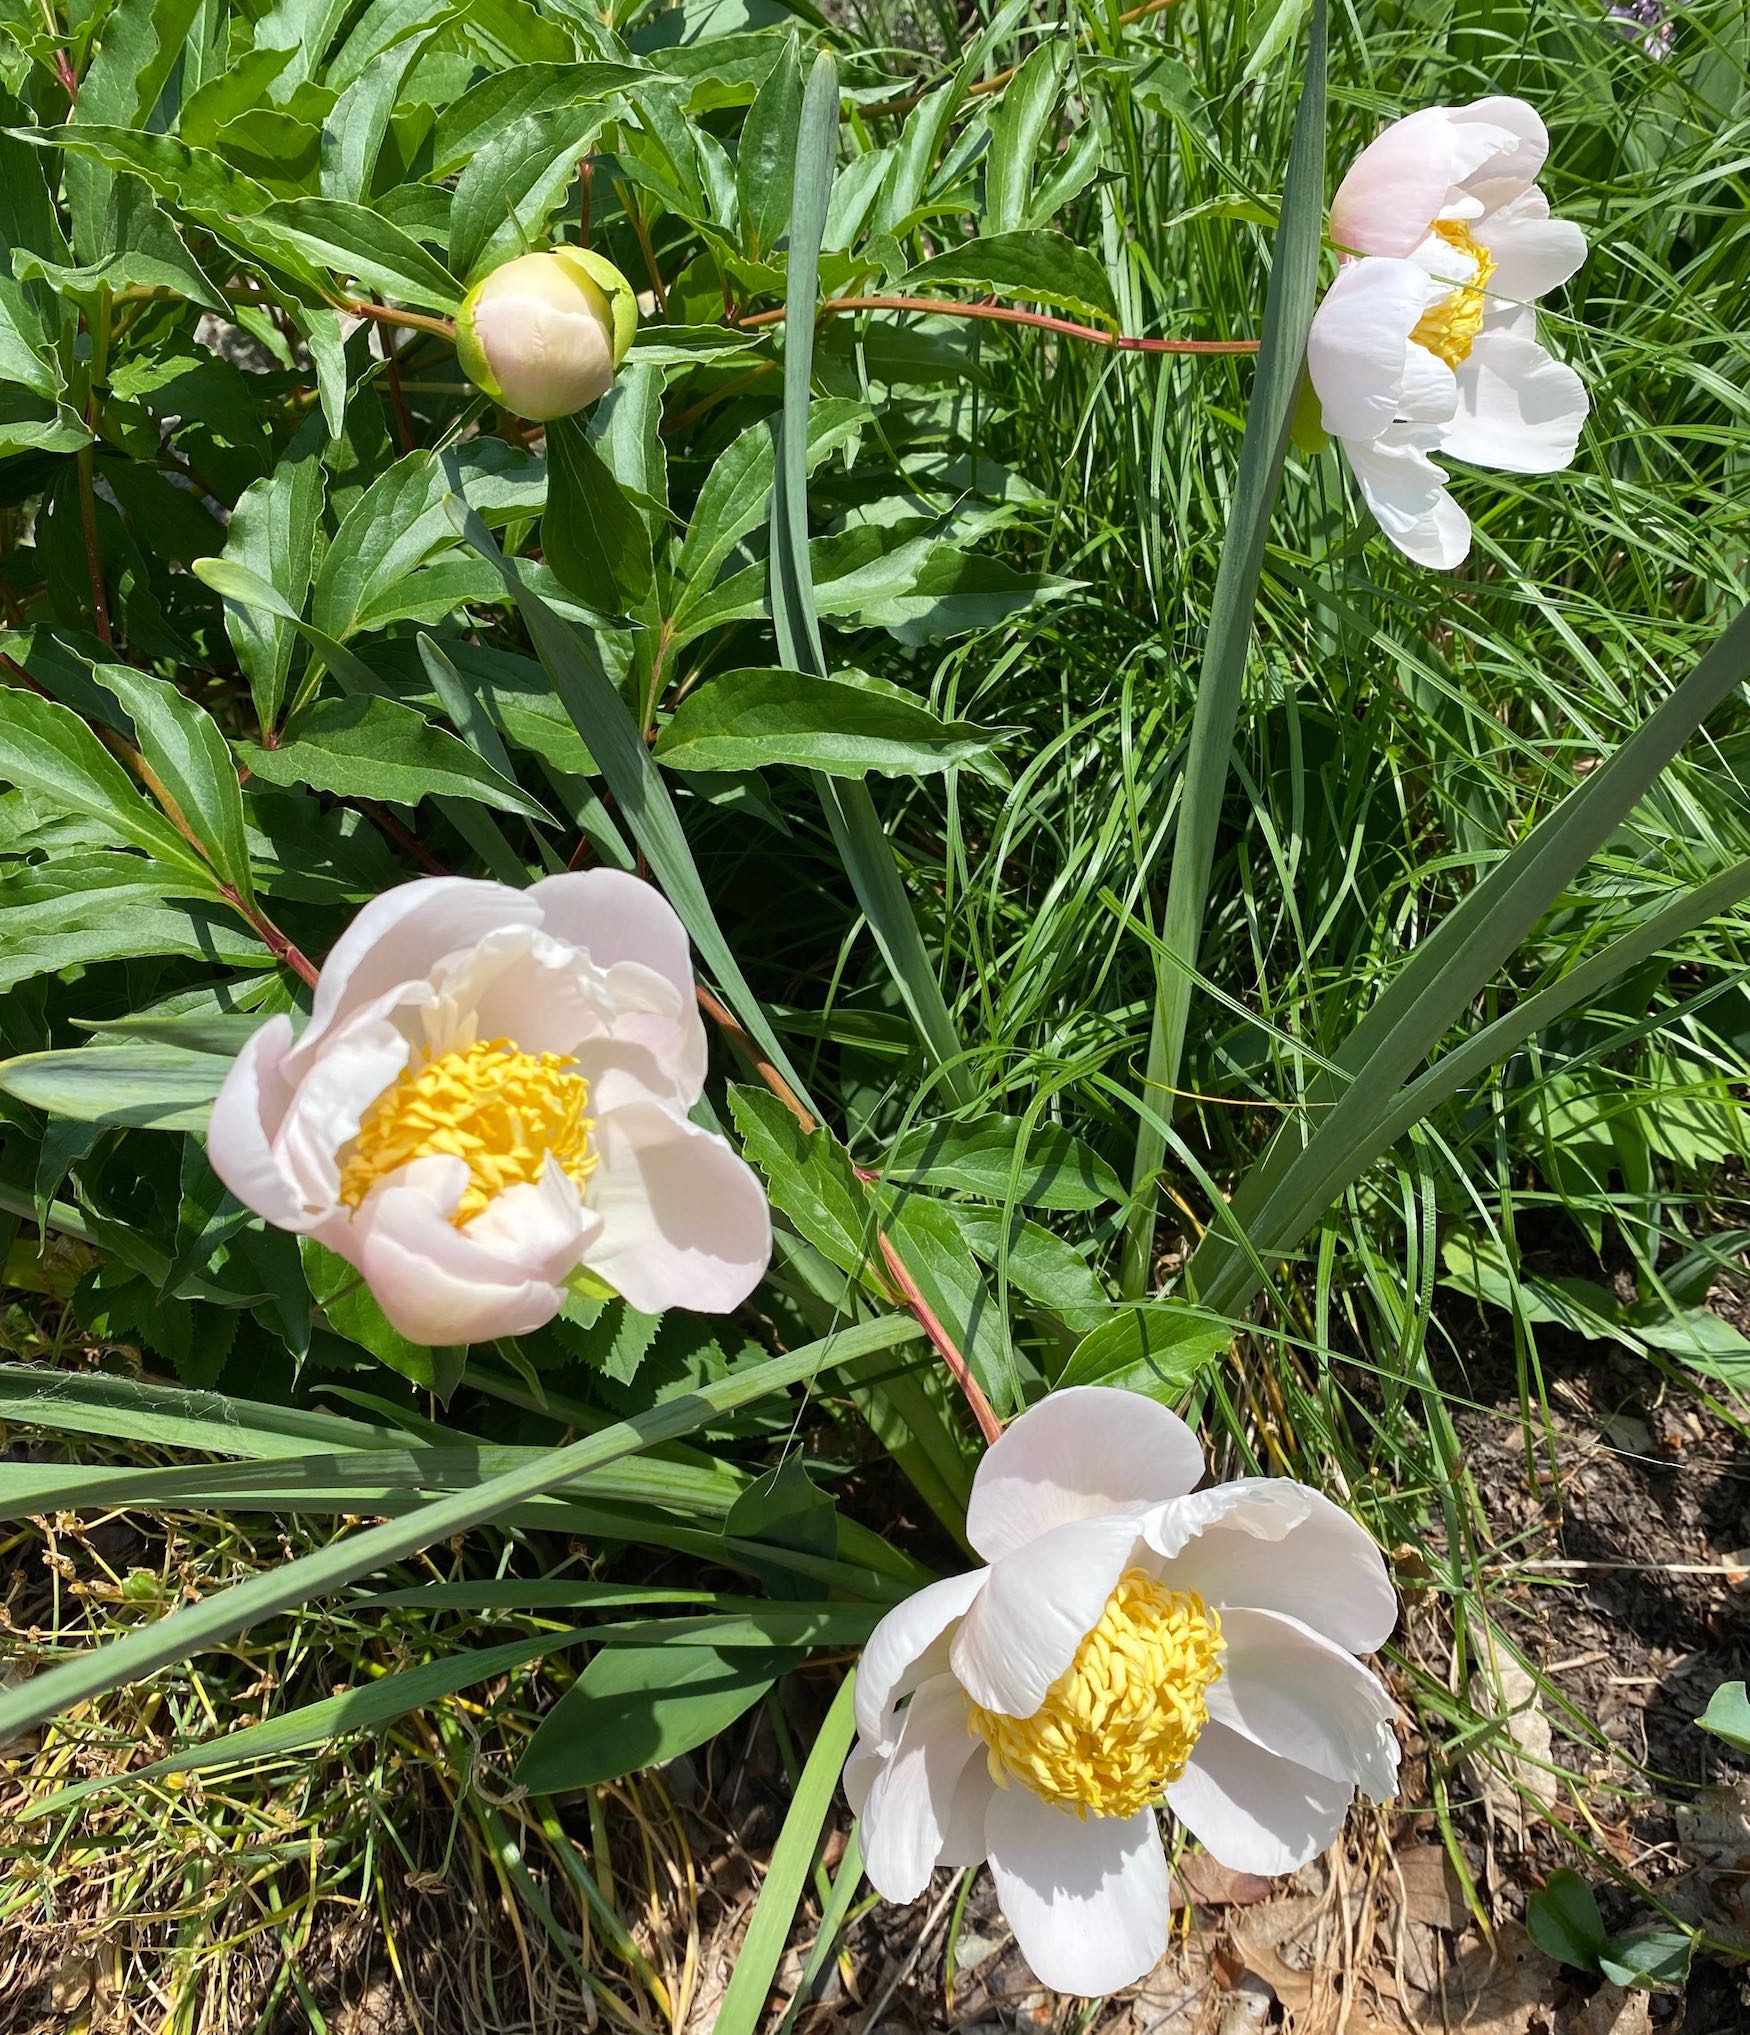 White Peonies with Large Yellow Centers